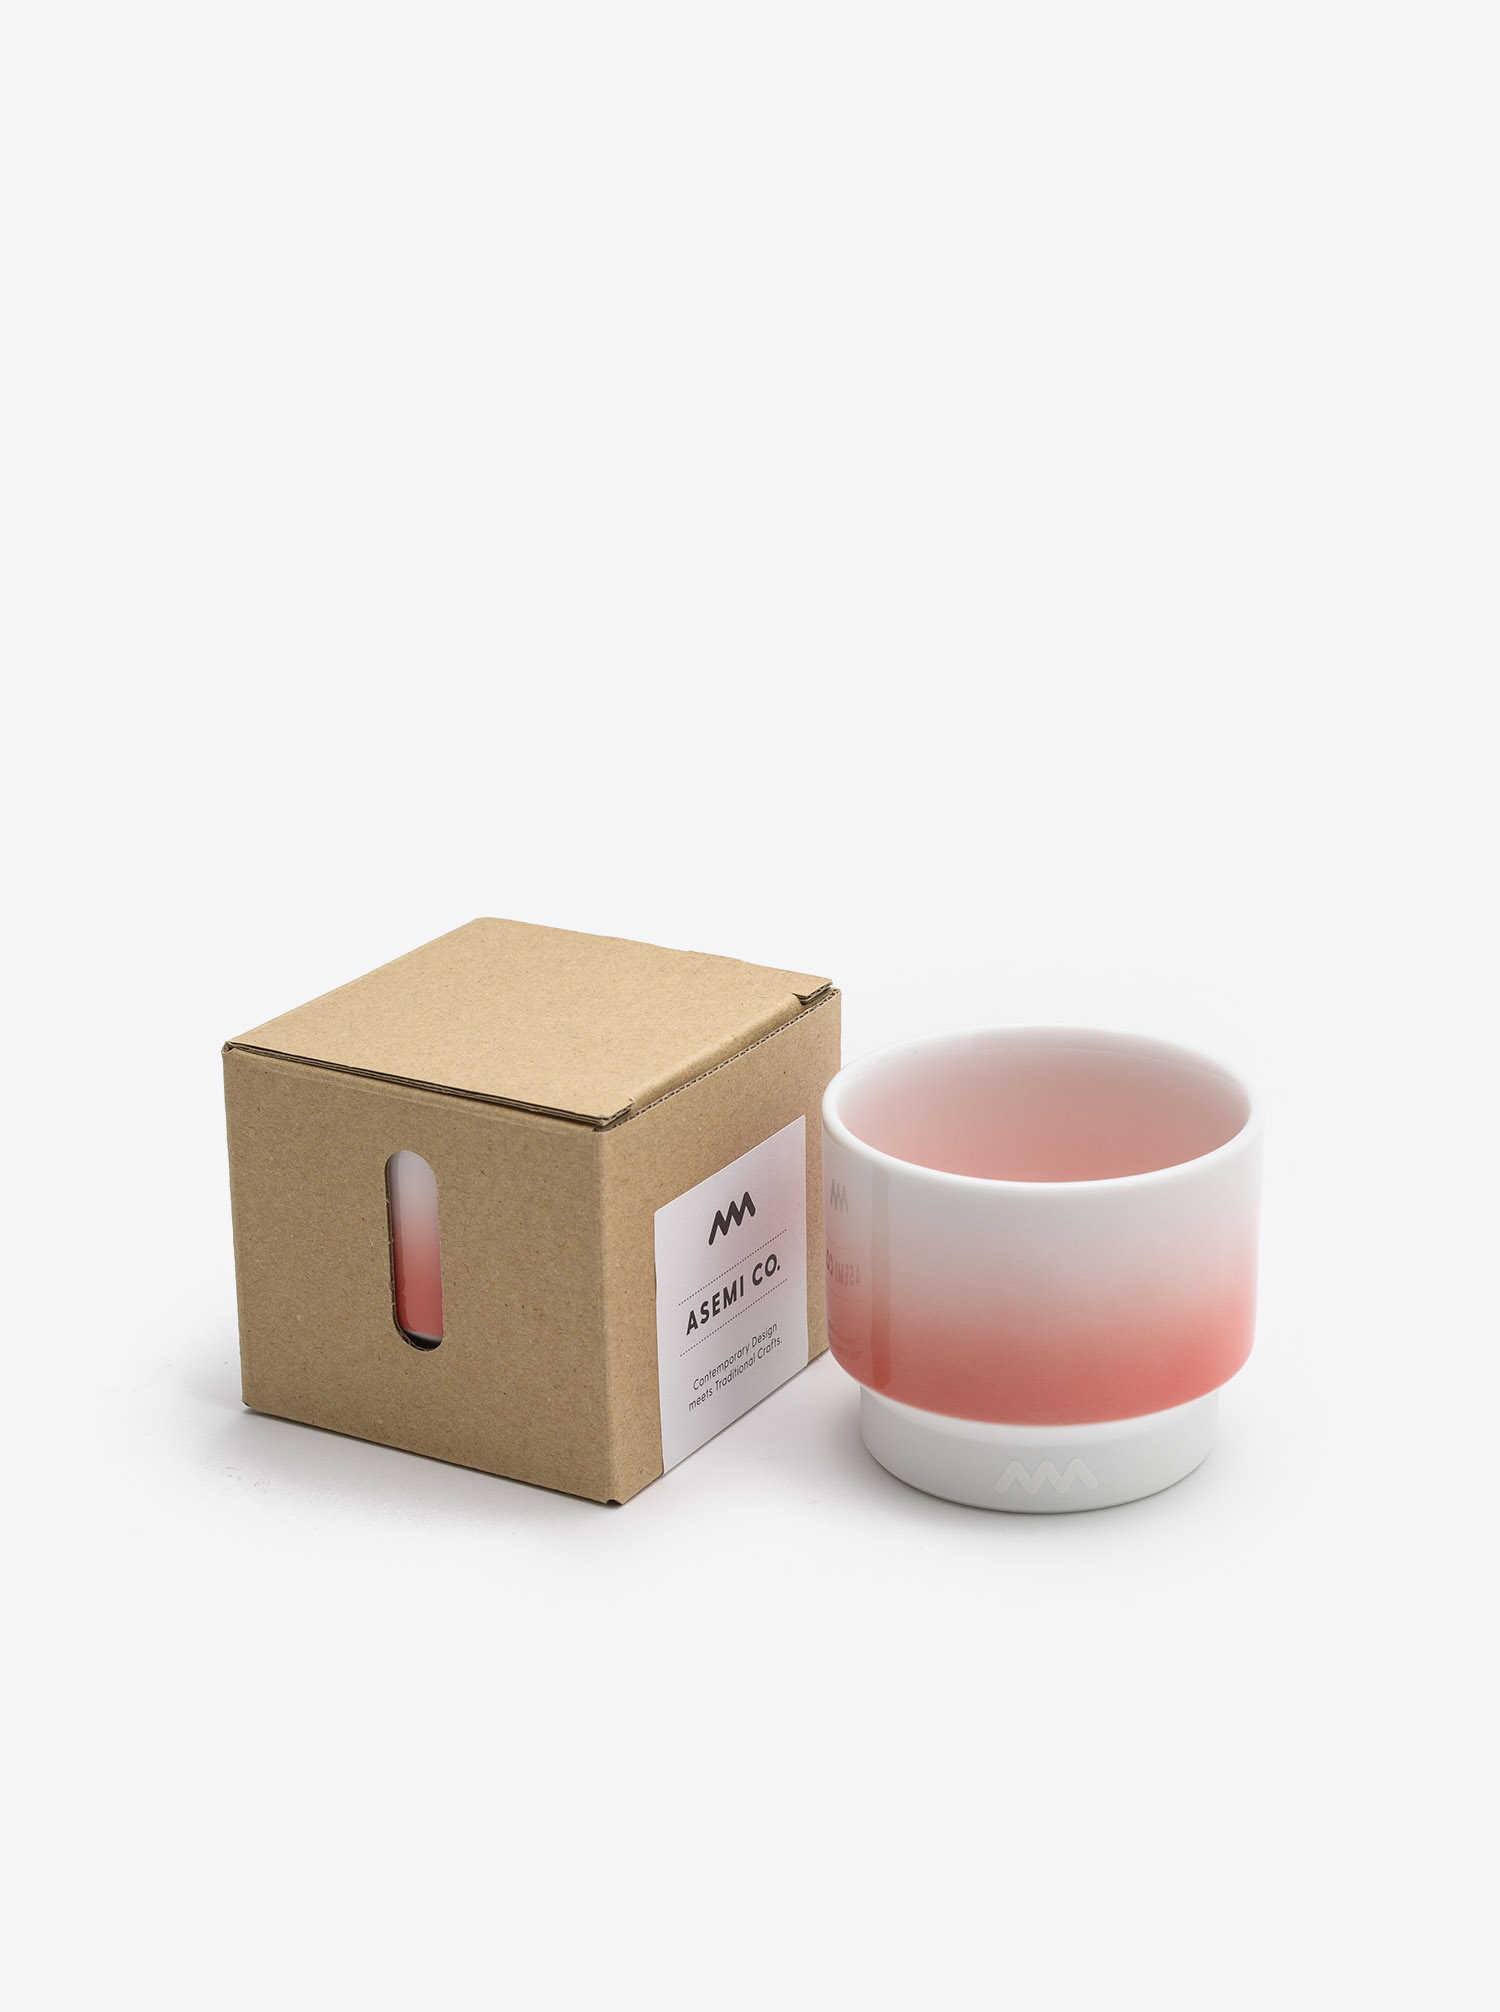 Teacup Hasami M red